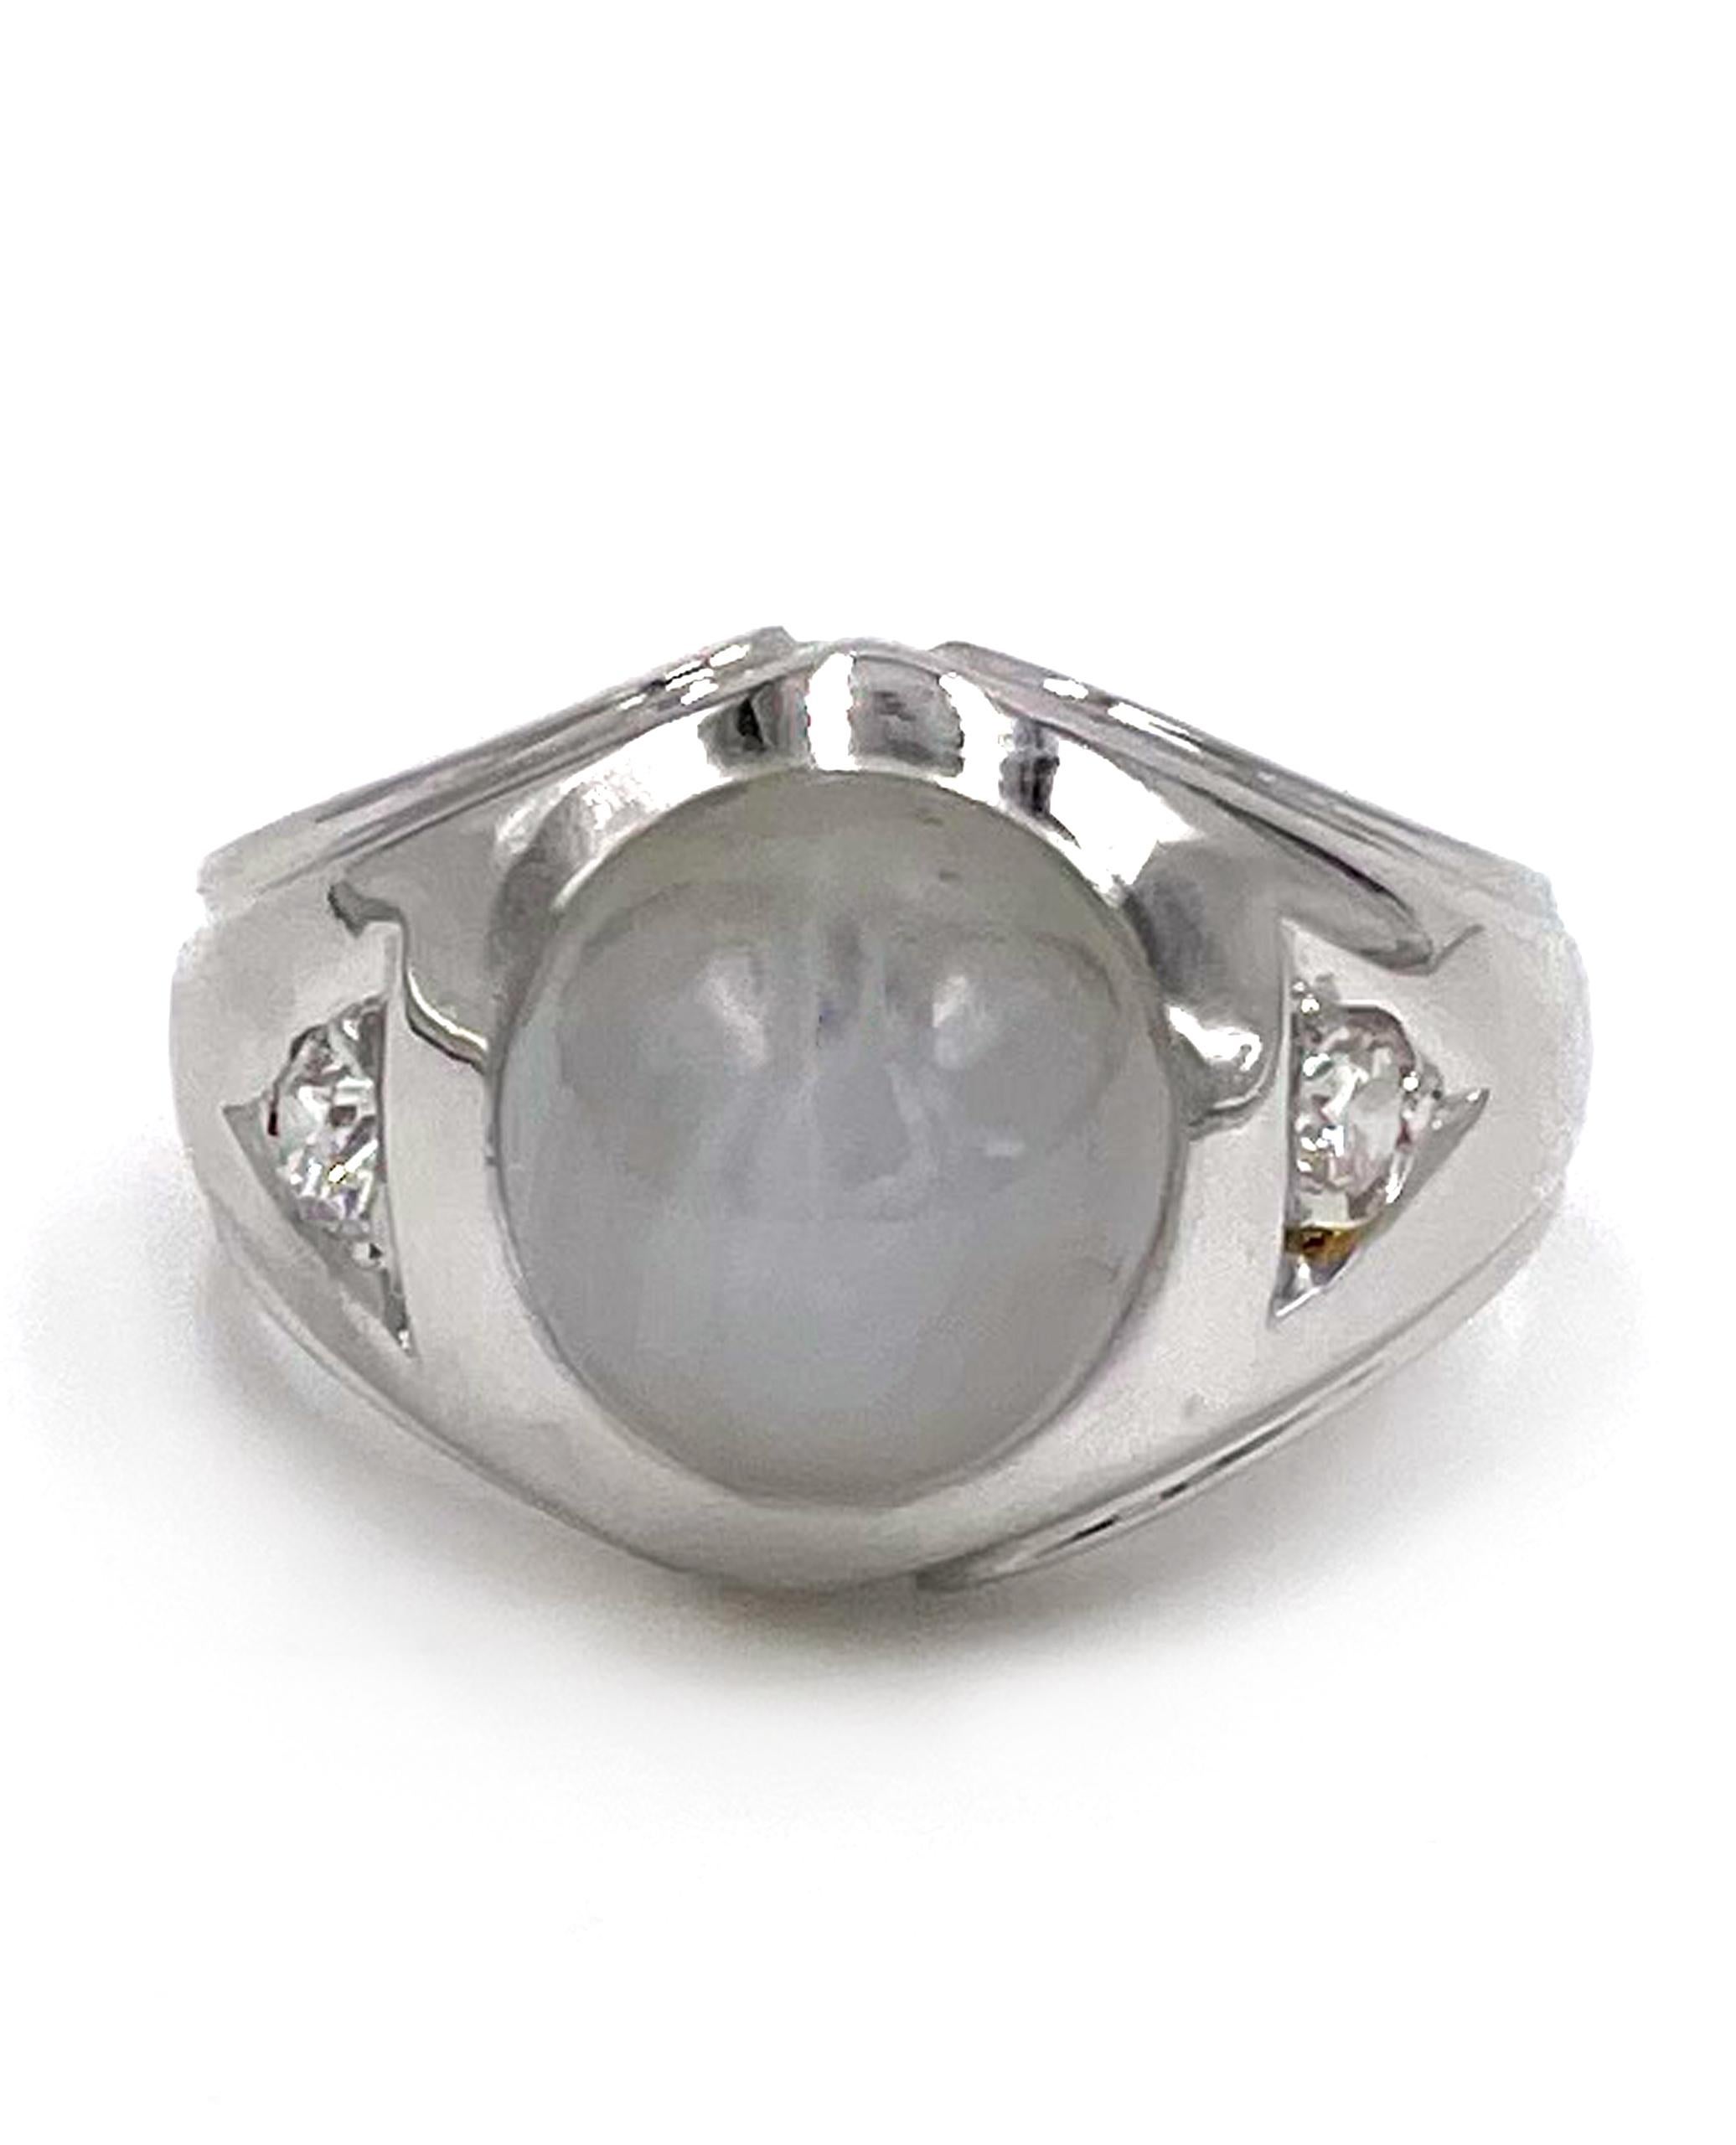 Preowned vintage 14K white gold flush set ring with one oval shape grey color star sapphire and two round side diamonds approximately 0.12 carat. 

* Finger size 5.75.
* Star sapphire is approximately 10.00mmx9.35mm
* Top width 13.44mm - tapers down